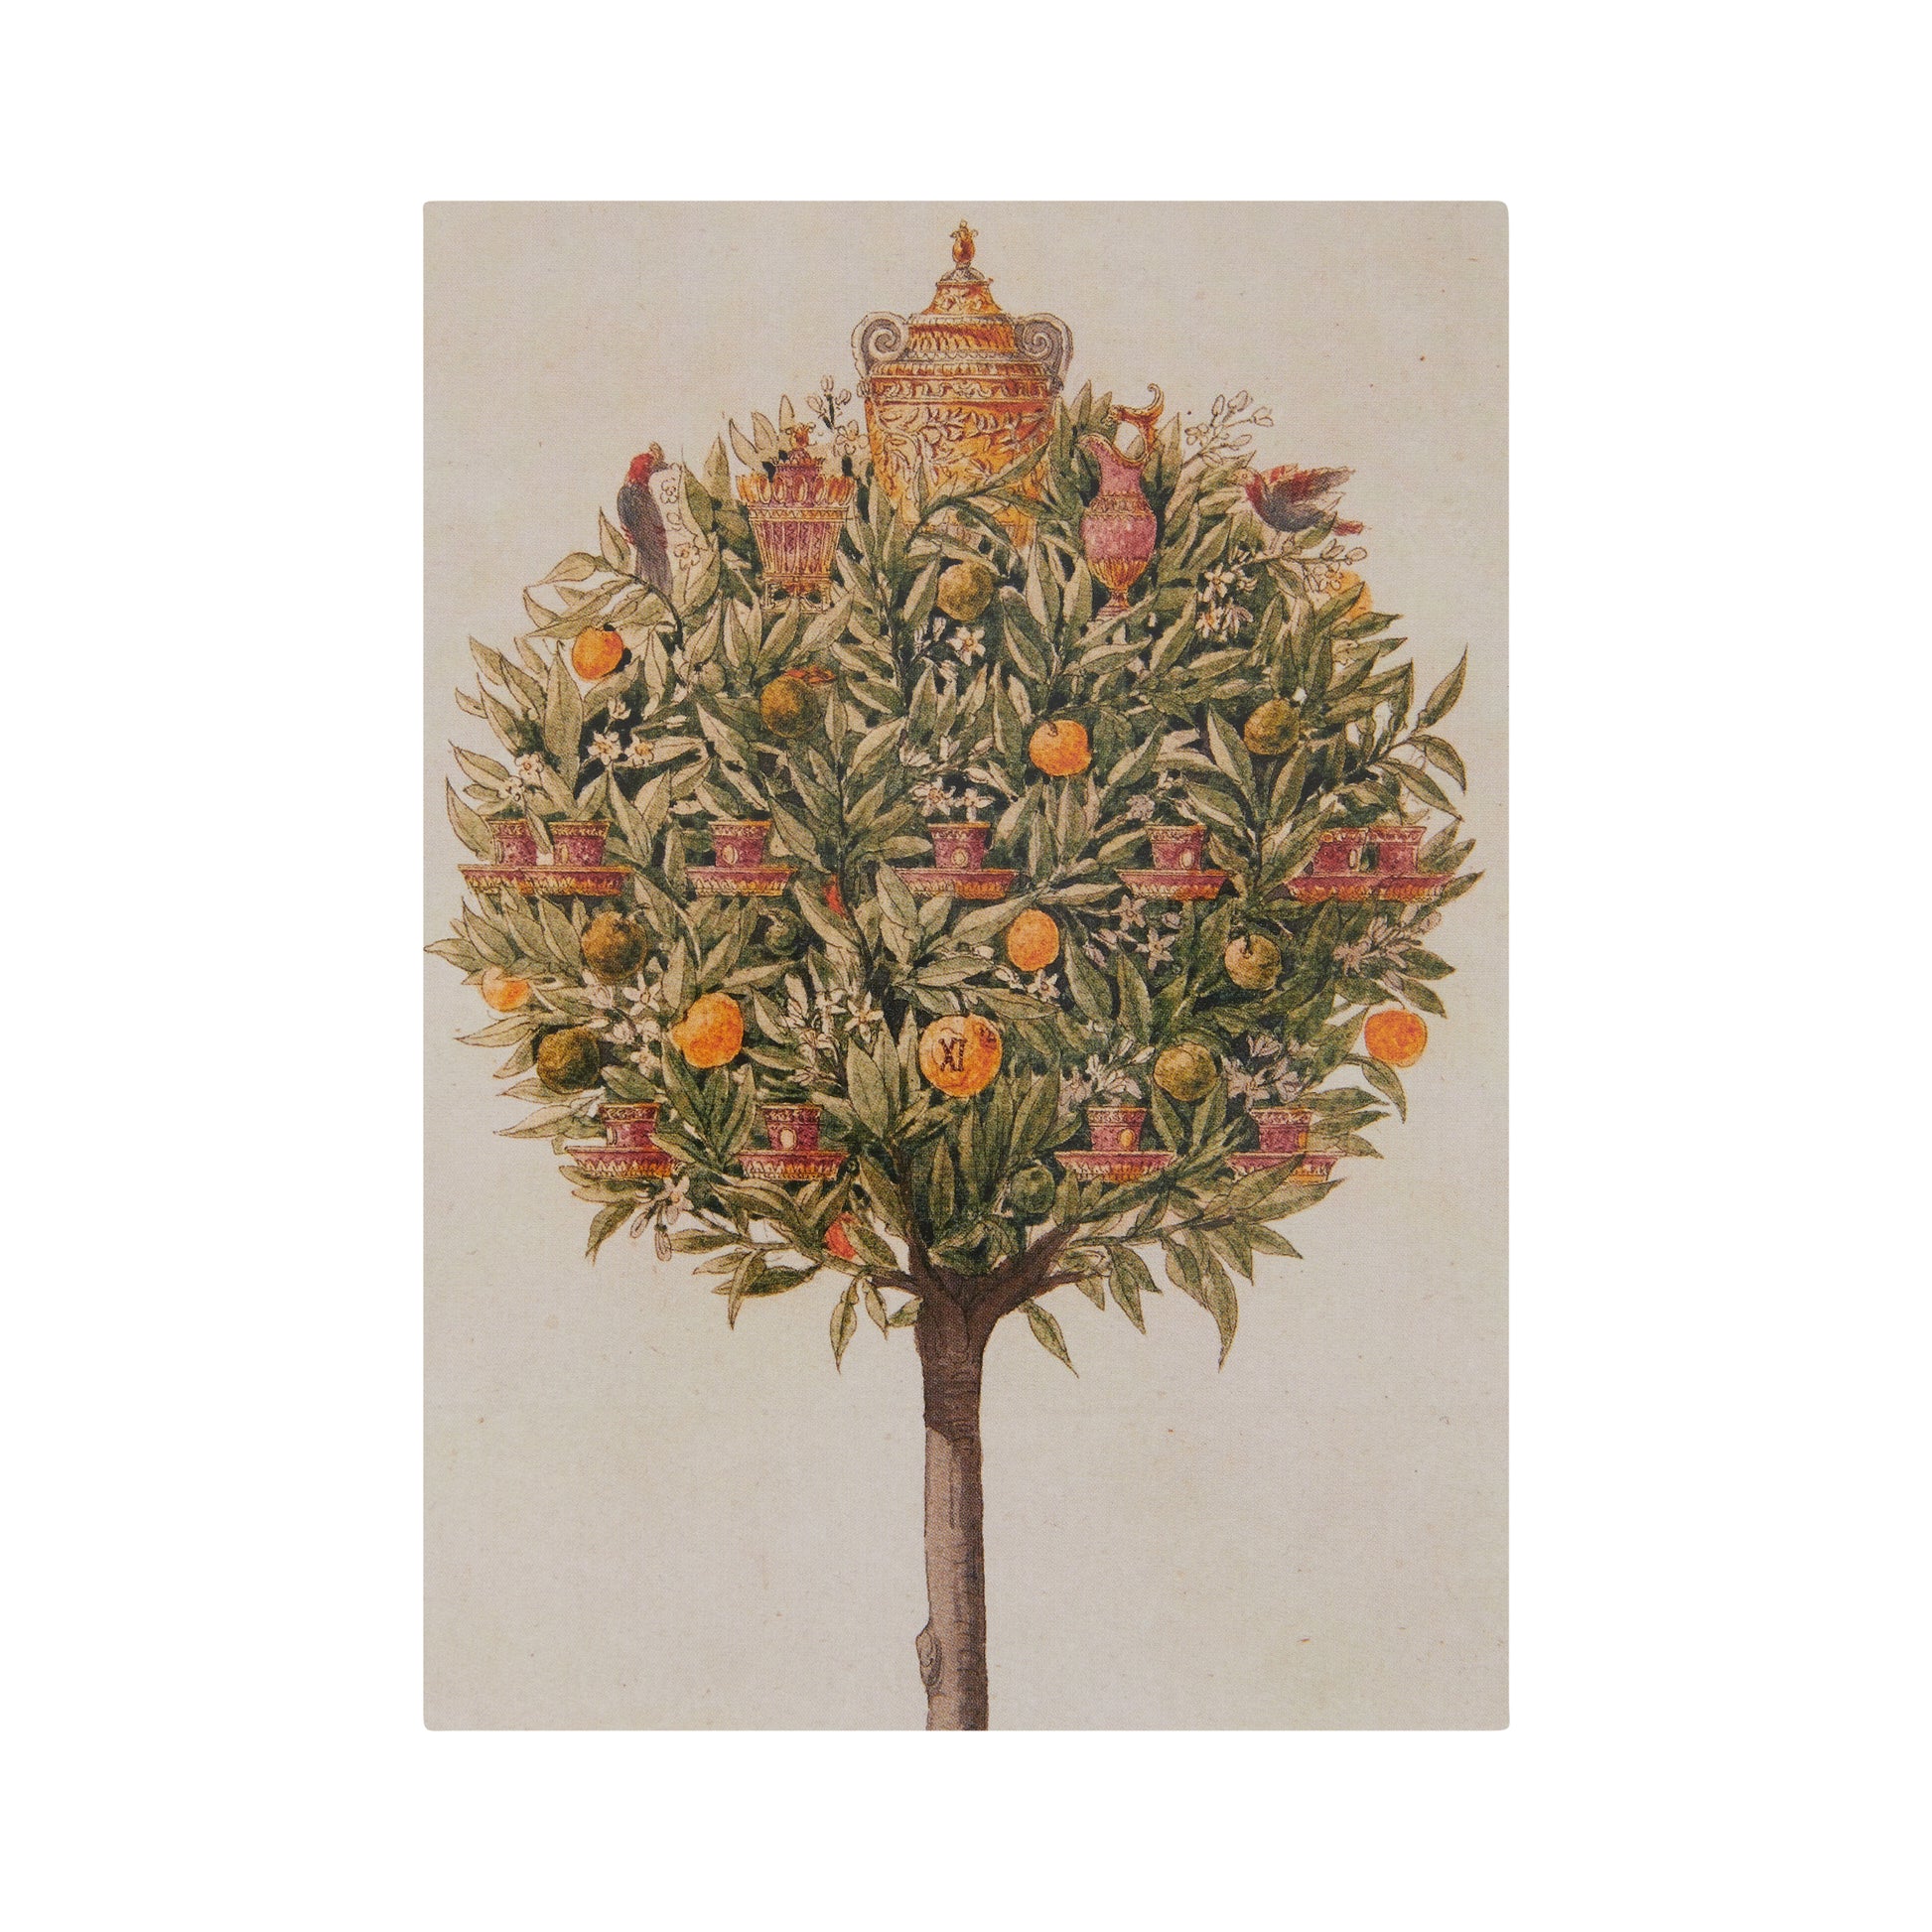 Rectangular Christmas card, portrait format. Orange tree with case and cups, by Charles Percier. From the collection of the Fitzwilliam Museum.